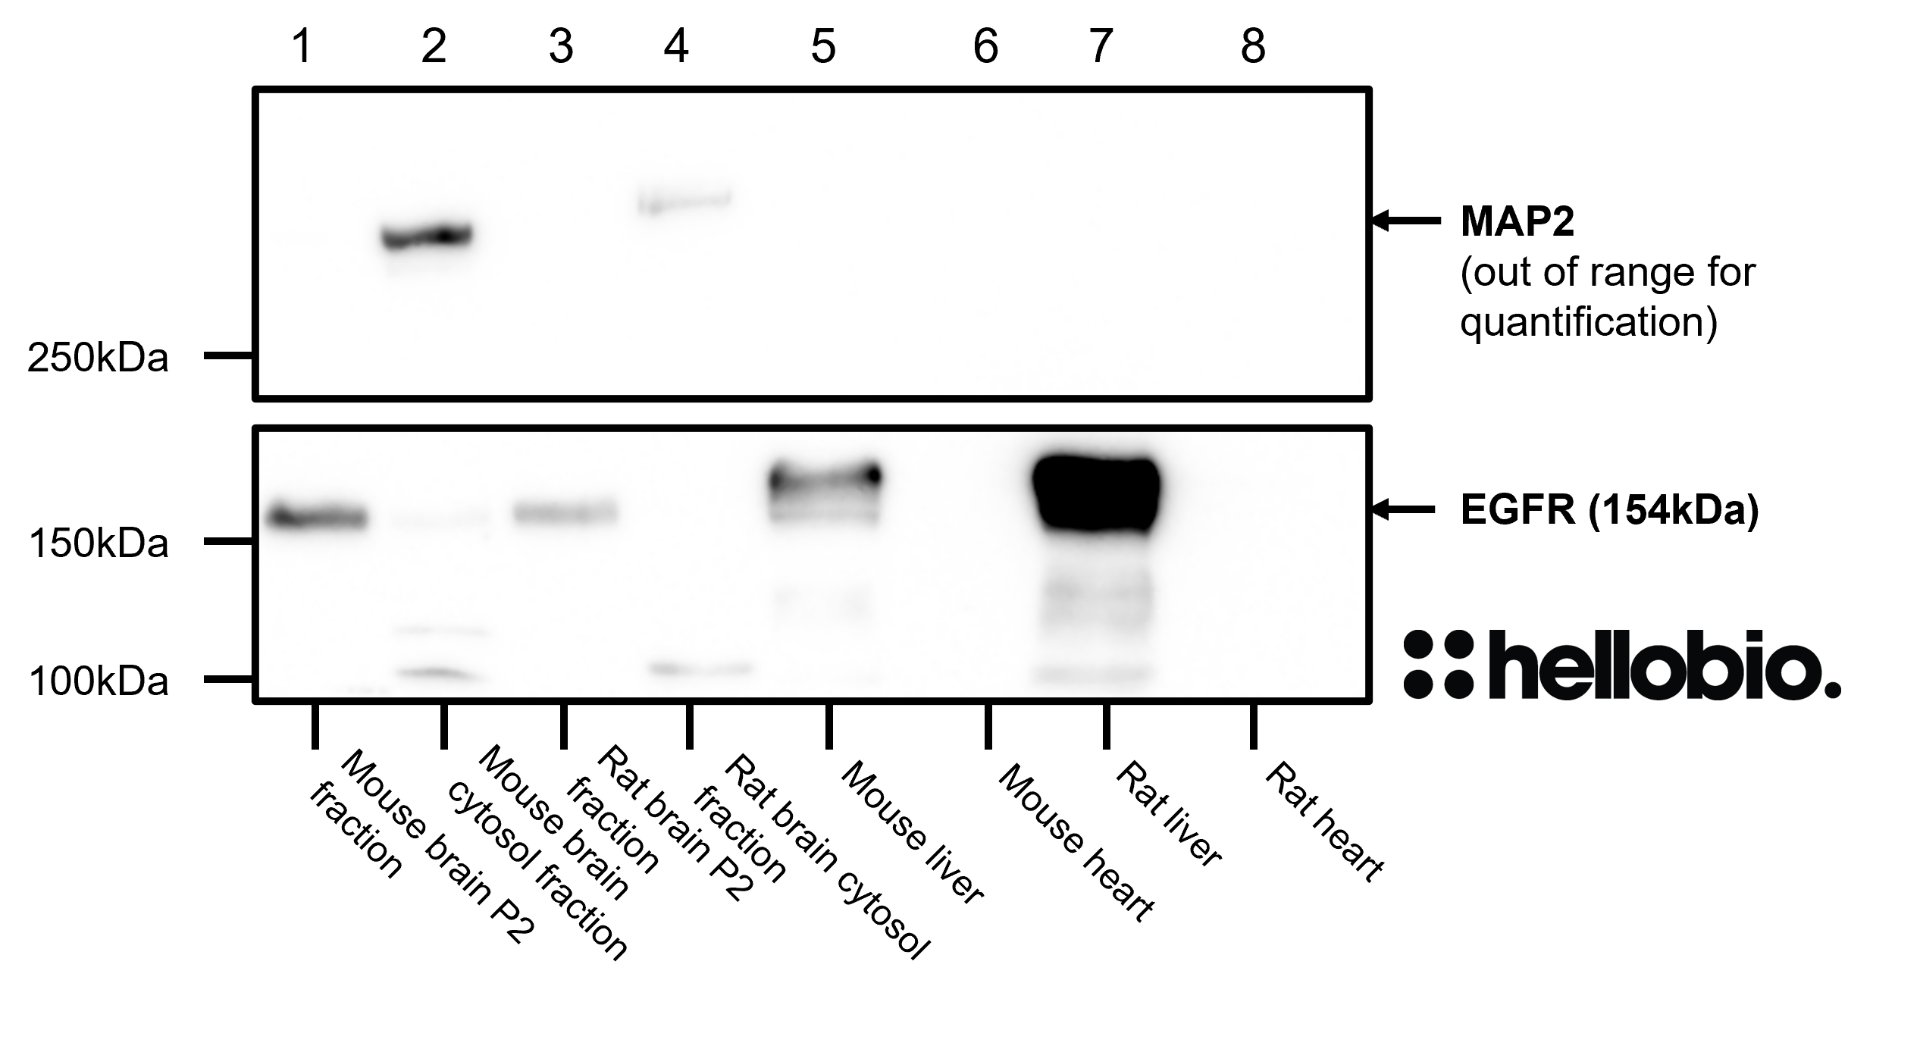 Figure 9. MAP2 and EGFR expression in various tissue lysates and preparations. 